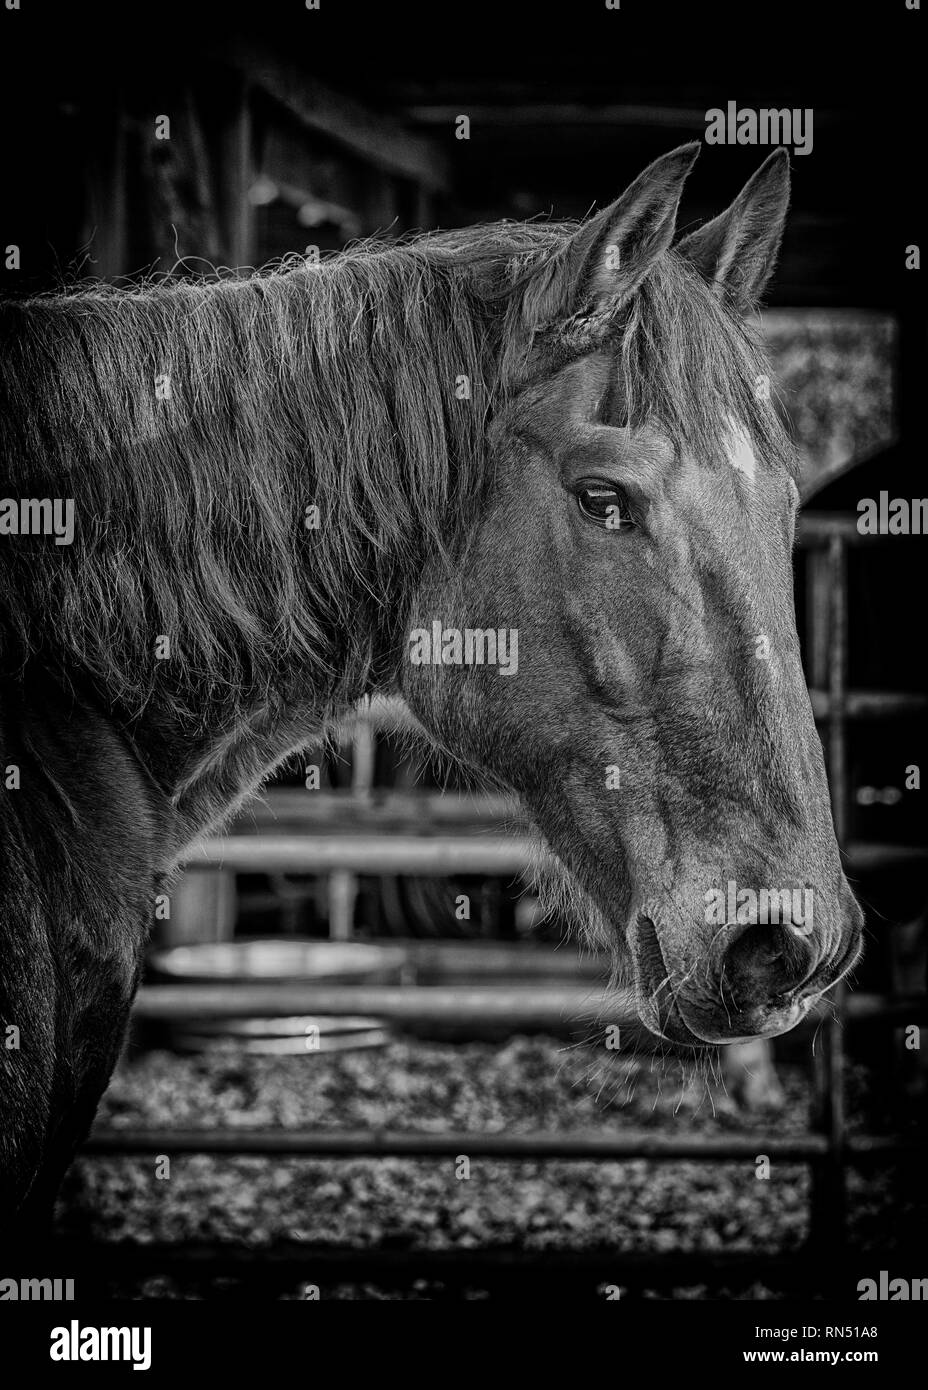 Portrait of a bay horse with blurred barn interior in background. Black and white image. Stock Photo